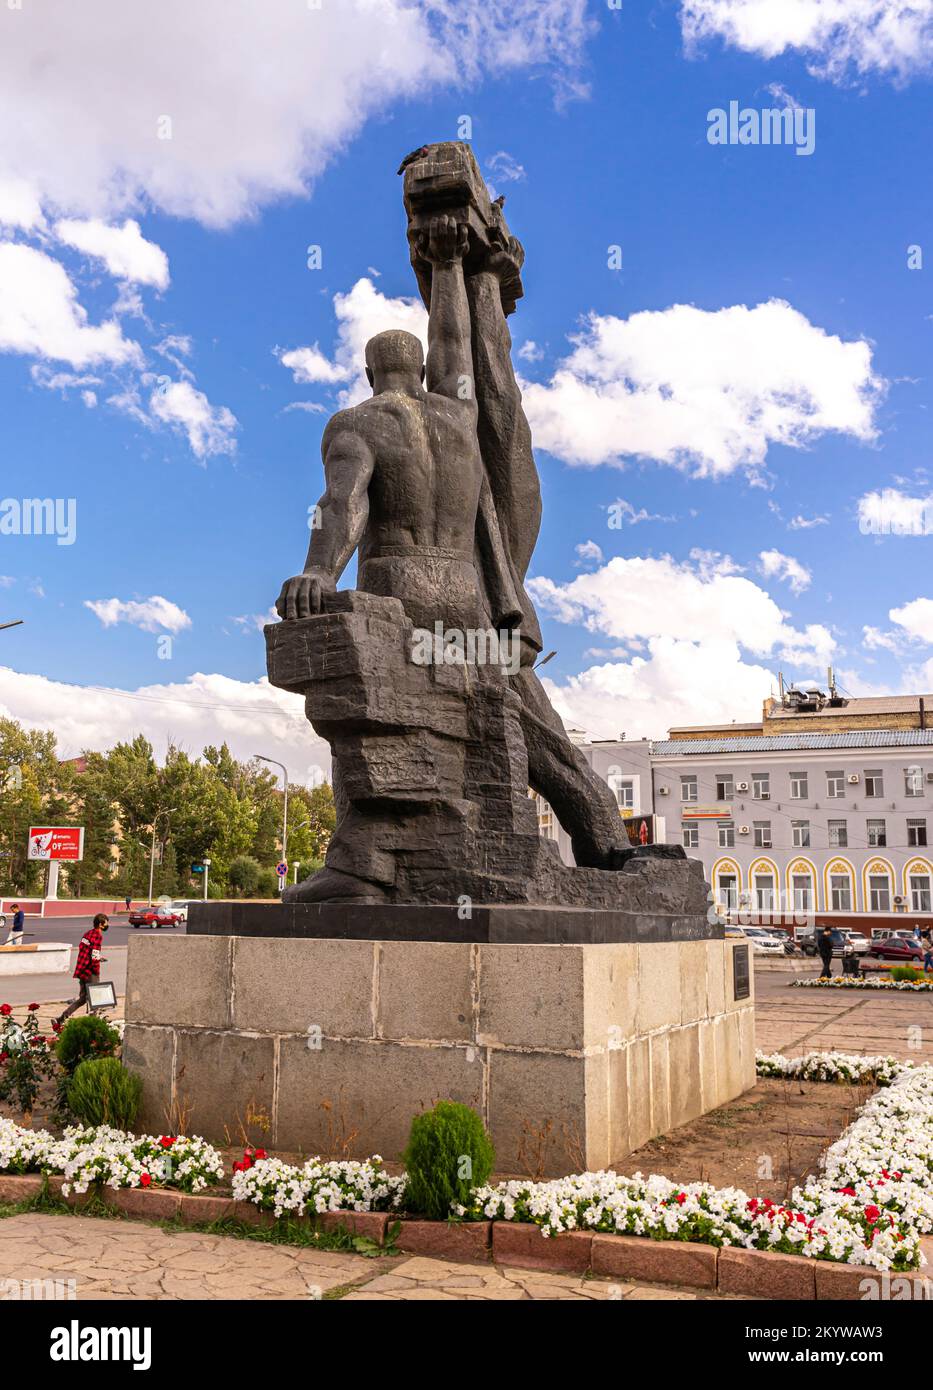 'Miners' Glory' Monument, sculpture depicting workers. Soviet monuments in Karagandy, Kazakhstan Stock Photo